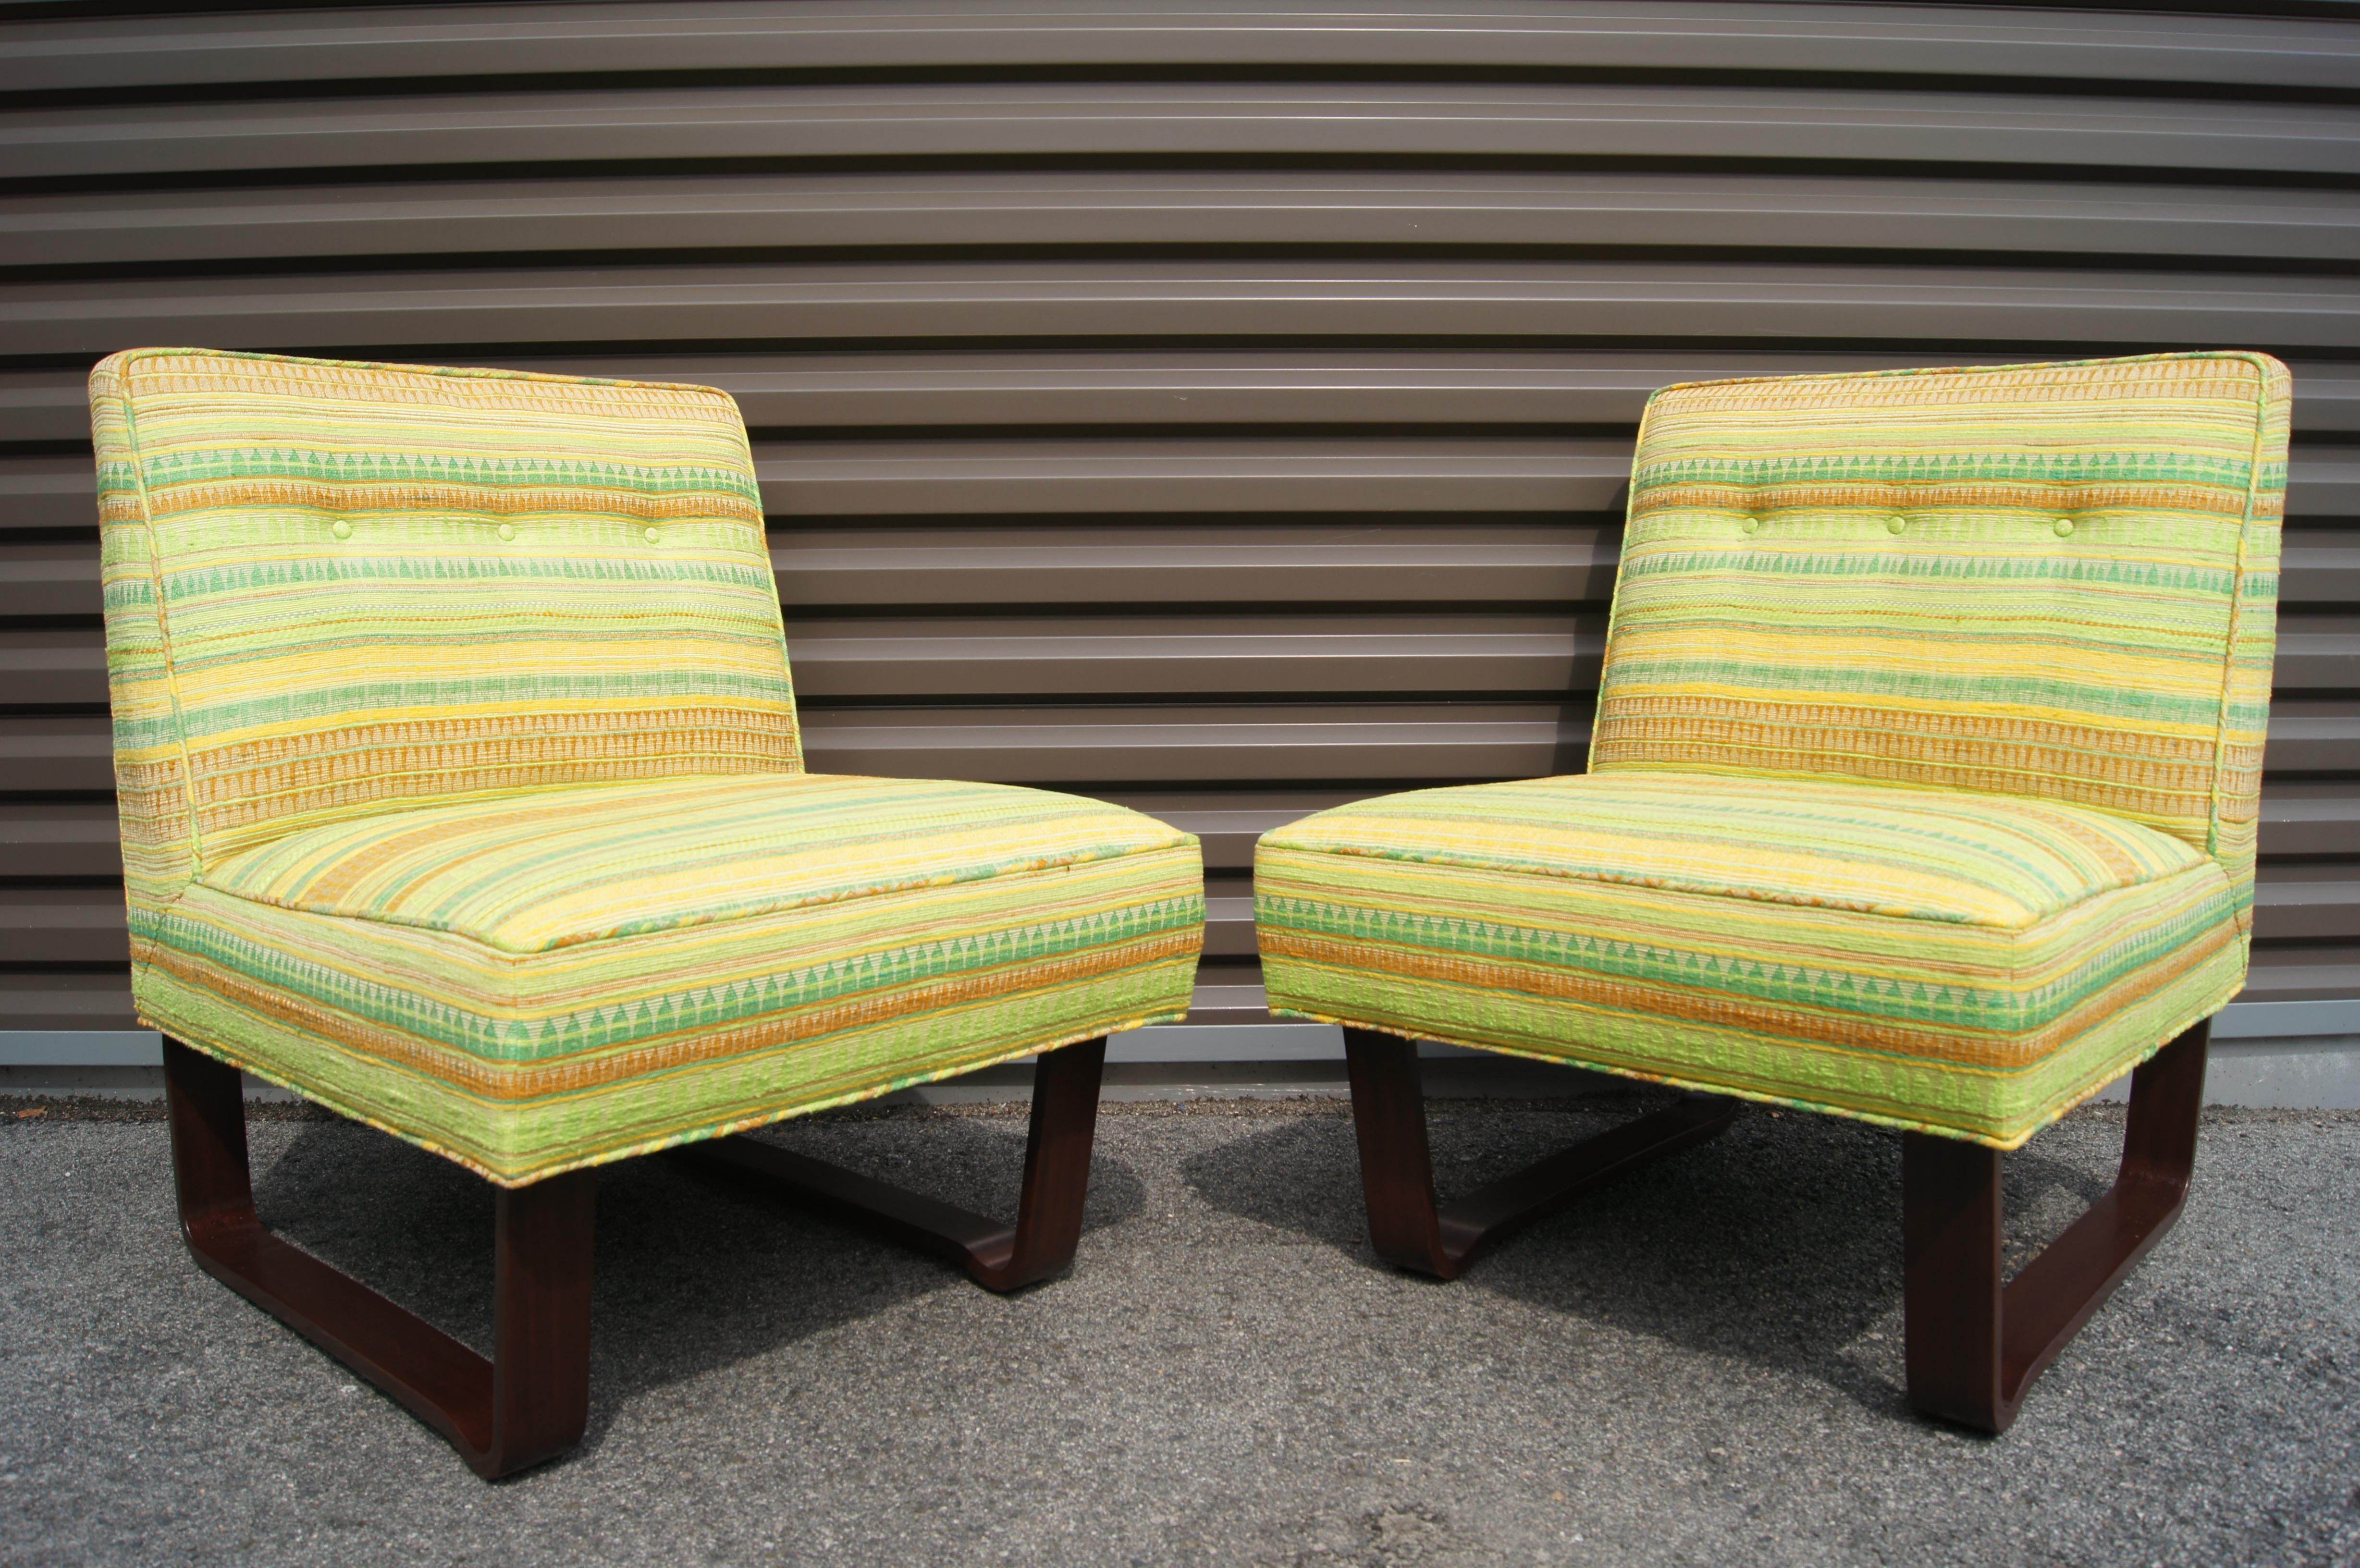 Textile Pair of Slipper Chairs by Edward Wormley for Dunbar